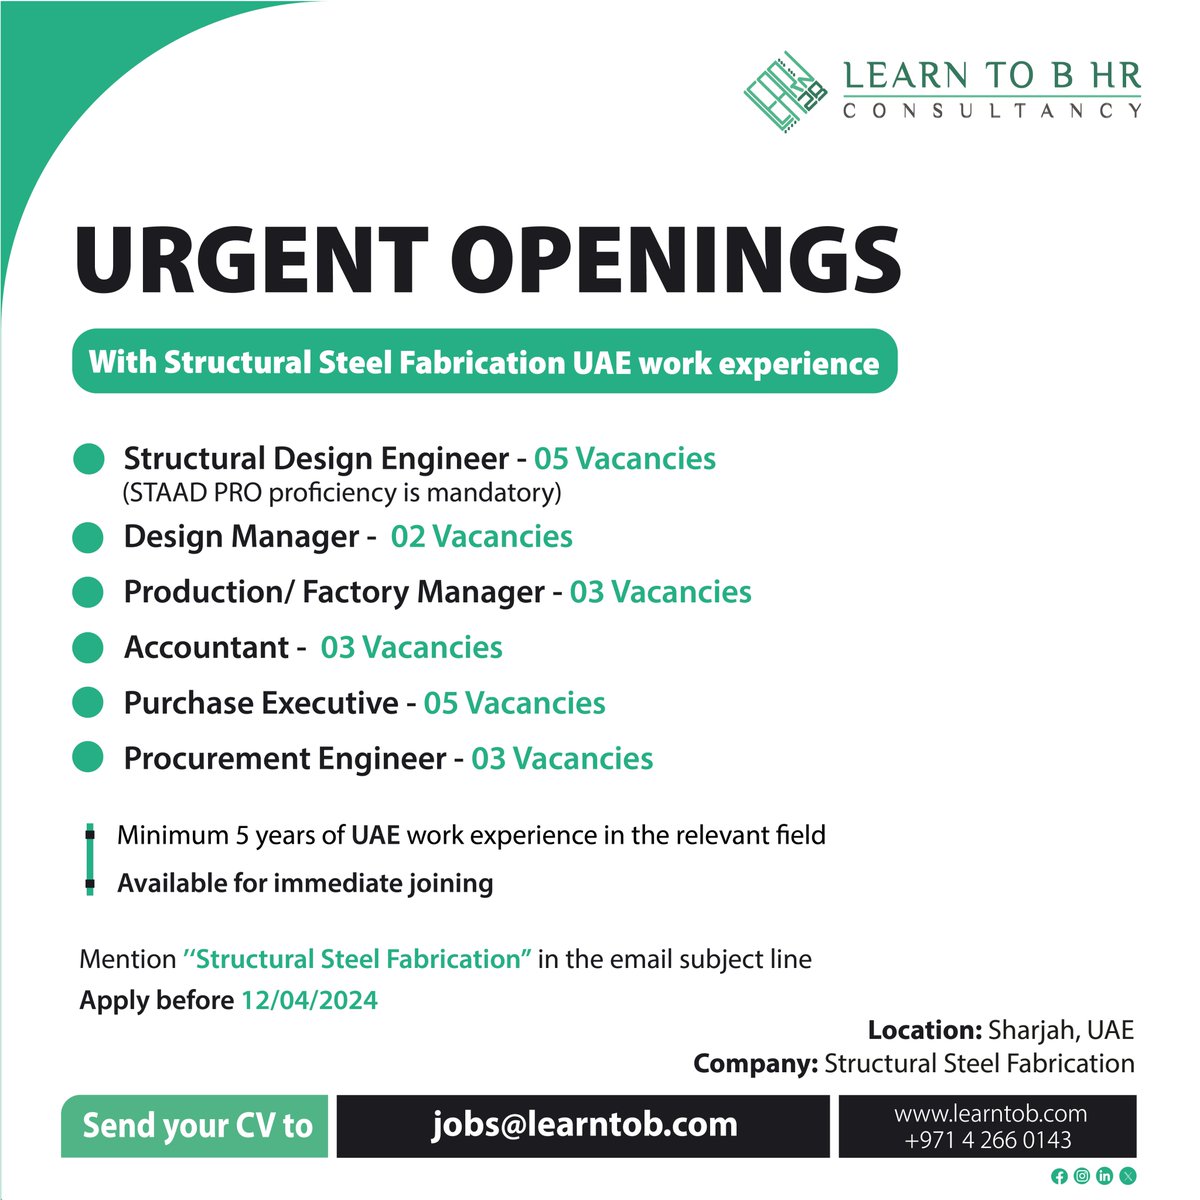 🚀 We're hiring!
Structural Design Engineer, Design Manager, Production/Factory Manager, Accountant, Purchase Executive, Procurement Engineer
Minimum 5 years UAE experience required.
📩 Mention 'Structural Steel Fabrication' in the email subject line.
#LearnToB #HiringNow #jobs